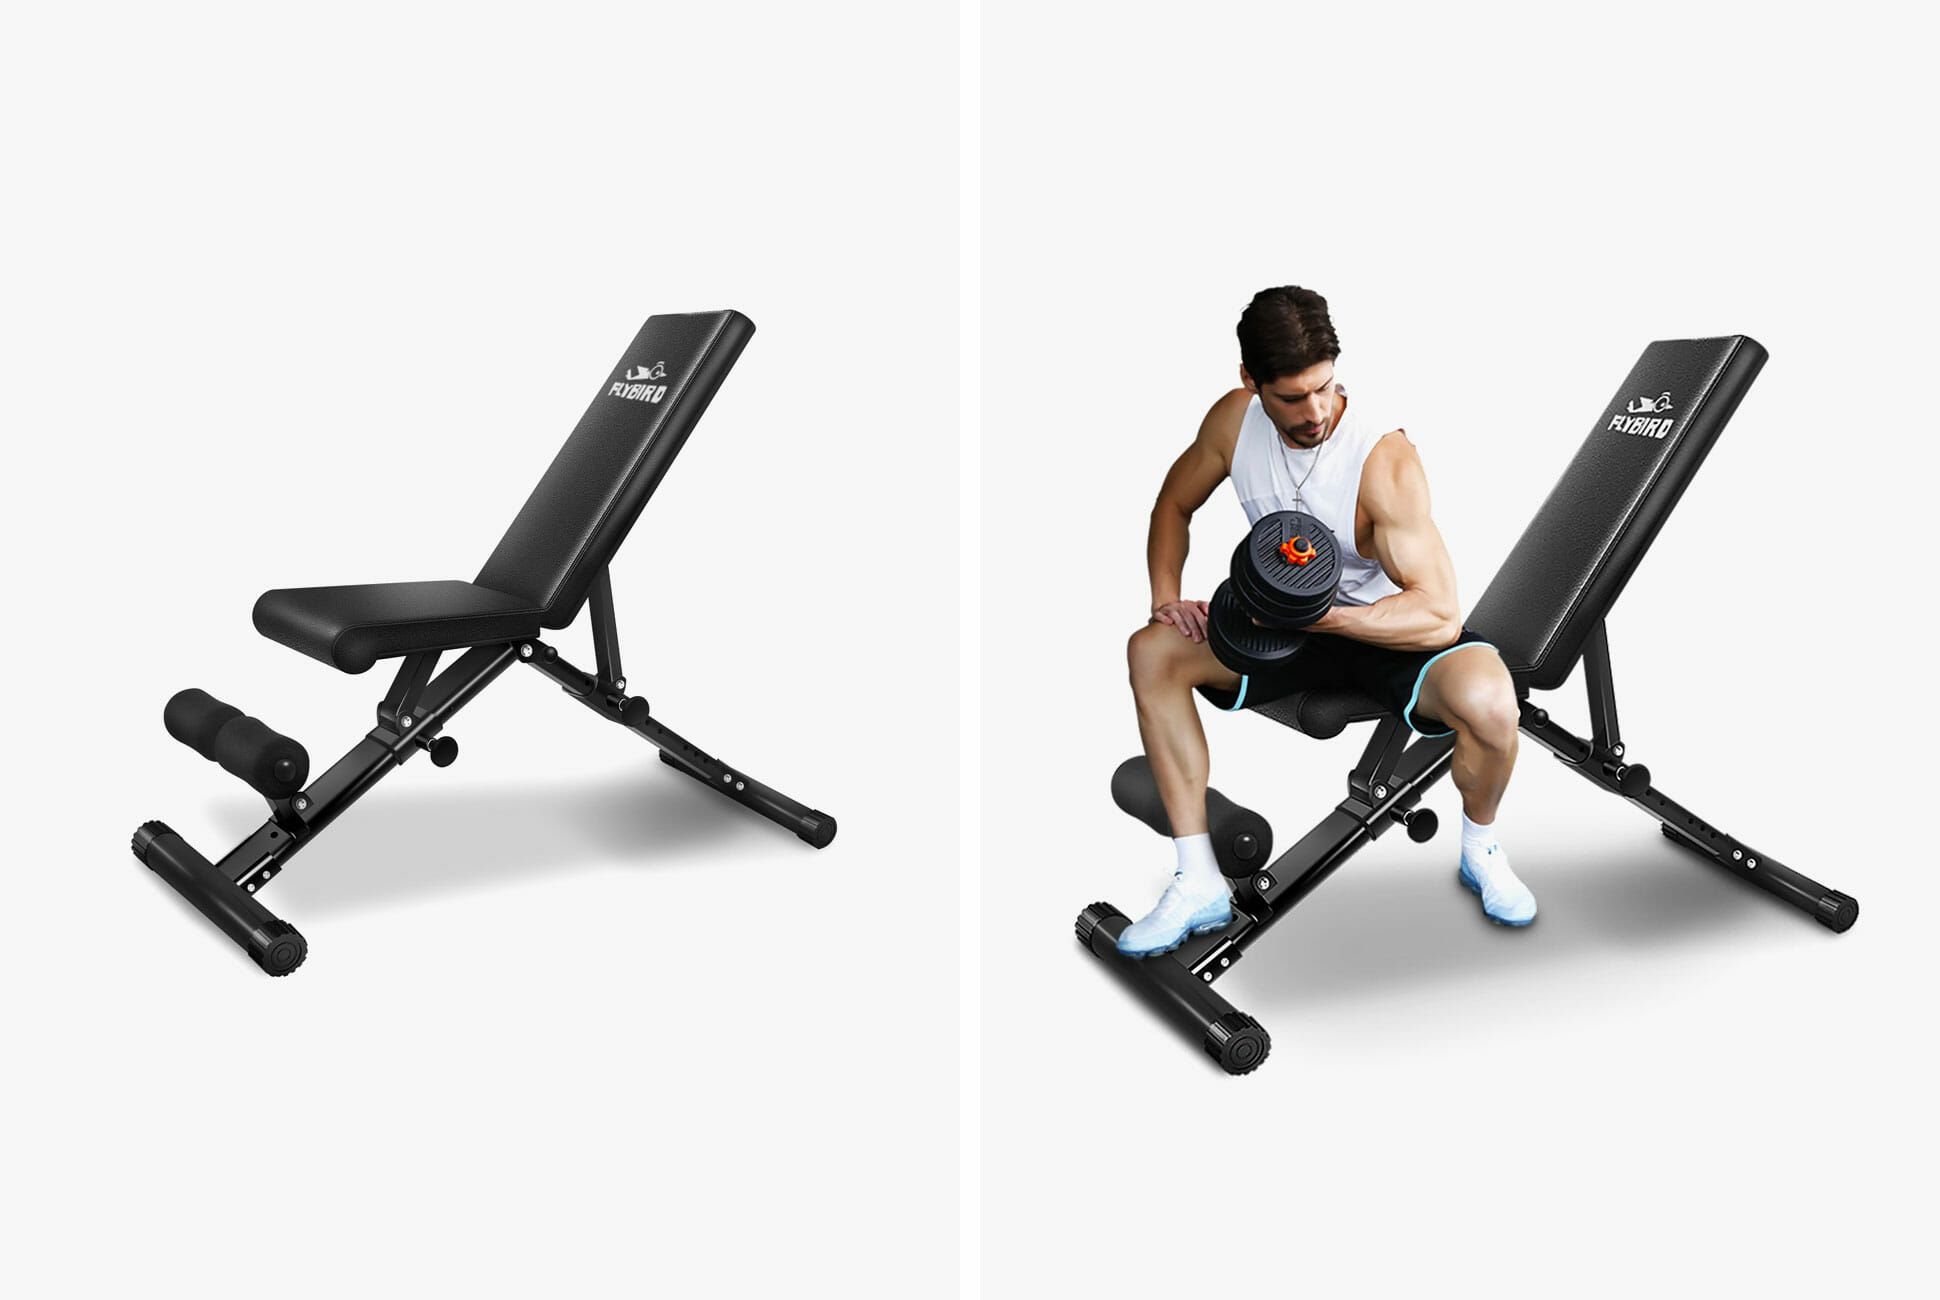 Flybird Adjustable Bench Review Outlet, 53% OFF | www.ingeniovirtual.com